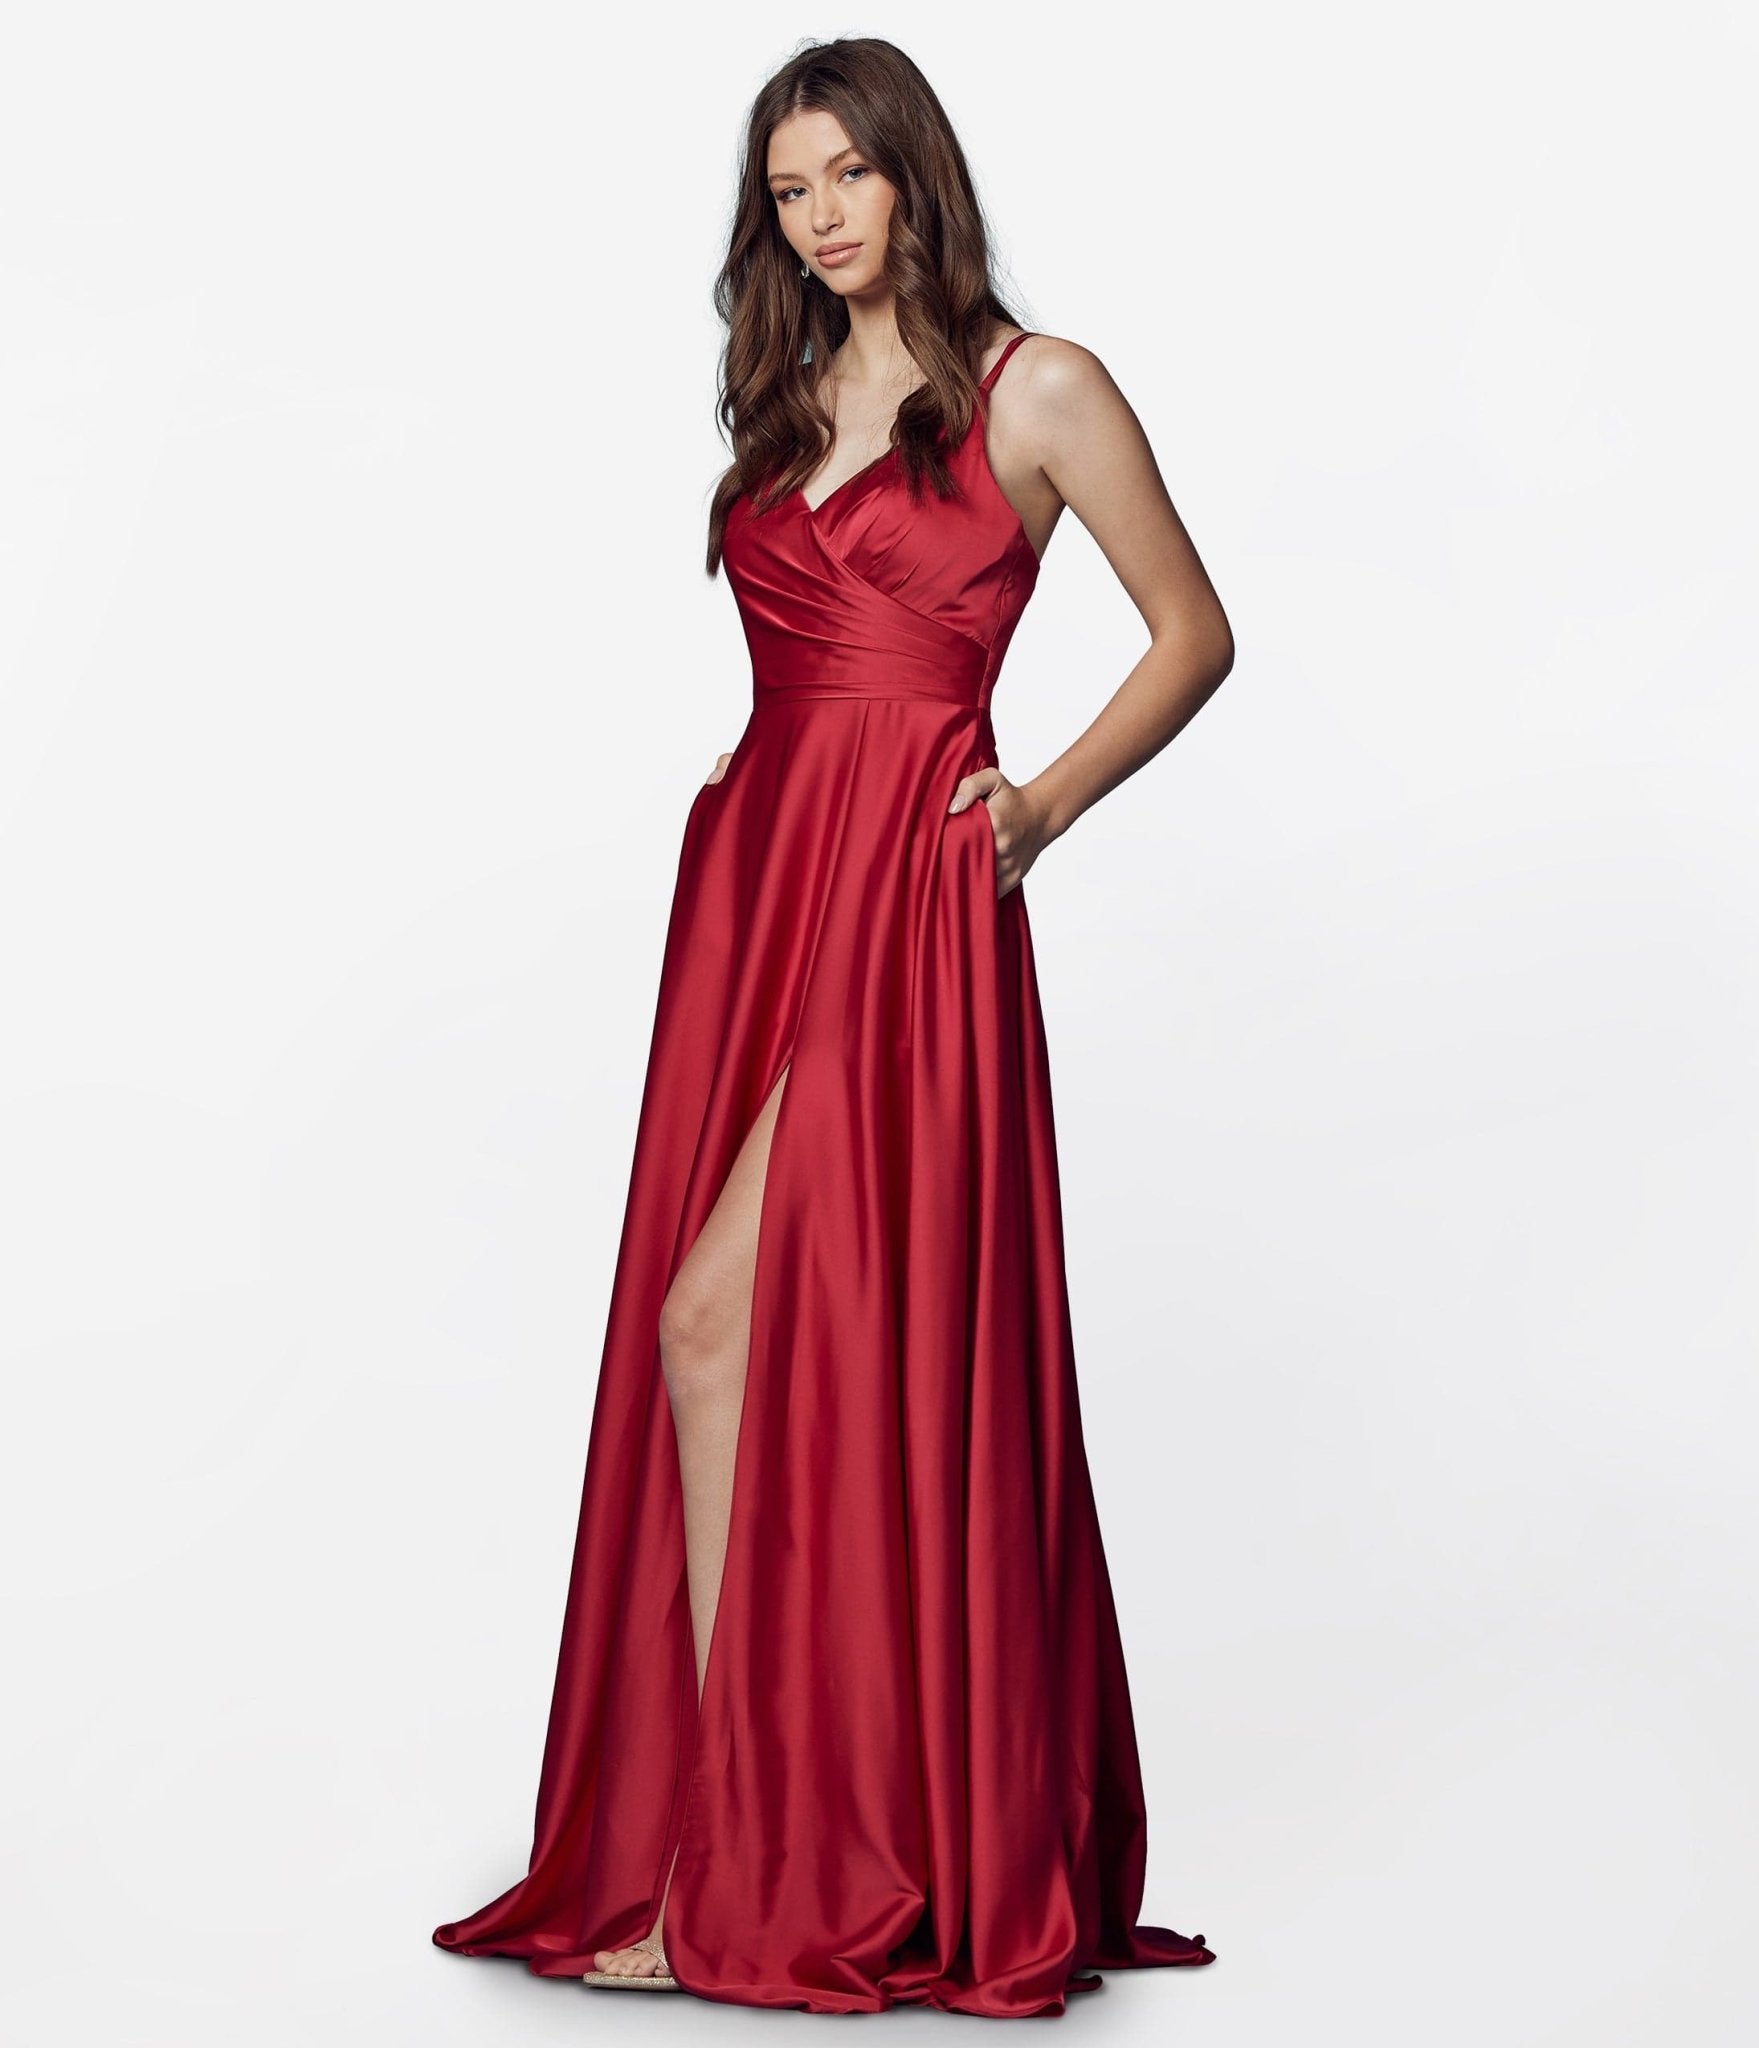 Red Satin Full Length Prom Dress - Unique Vintage - Womens, DRESSES, PROM AND SPECIAL OCCASION